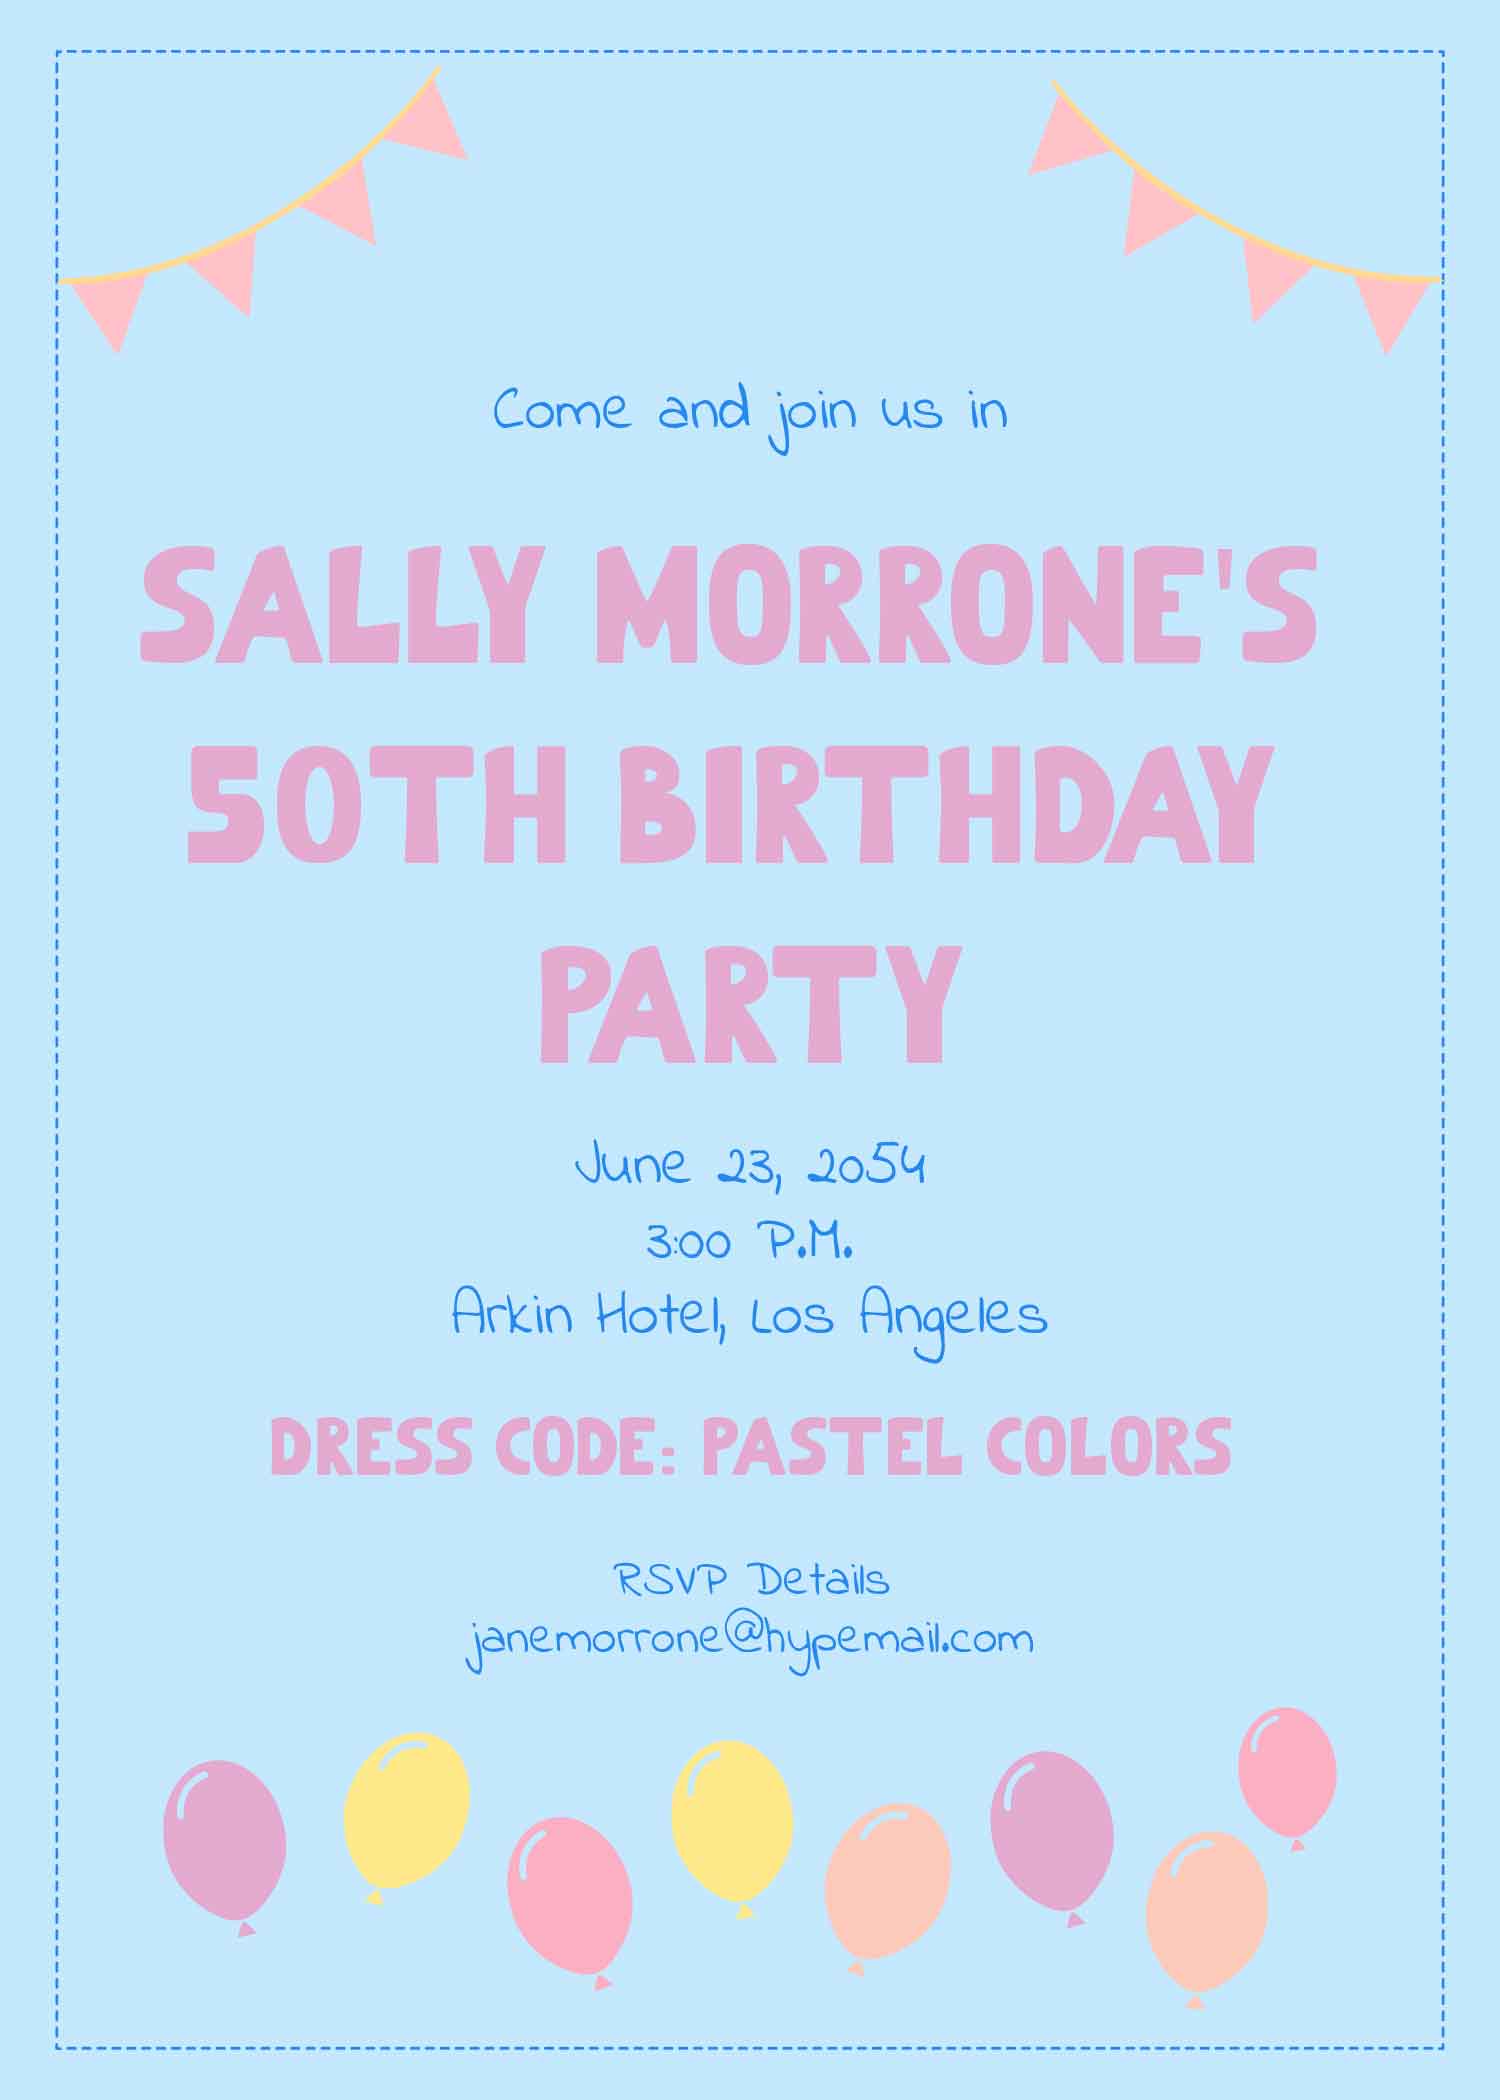 Simple 50th Birthday Invitation in Word, Google Docs, Illustrator, PSD, Apple Pages, Publisher